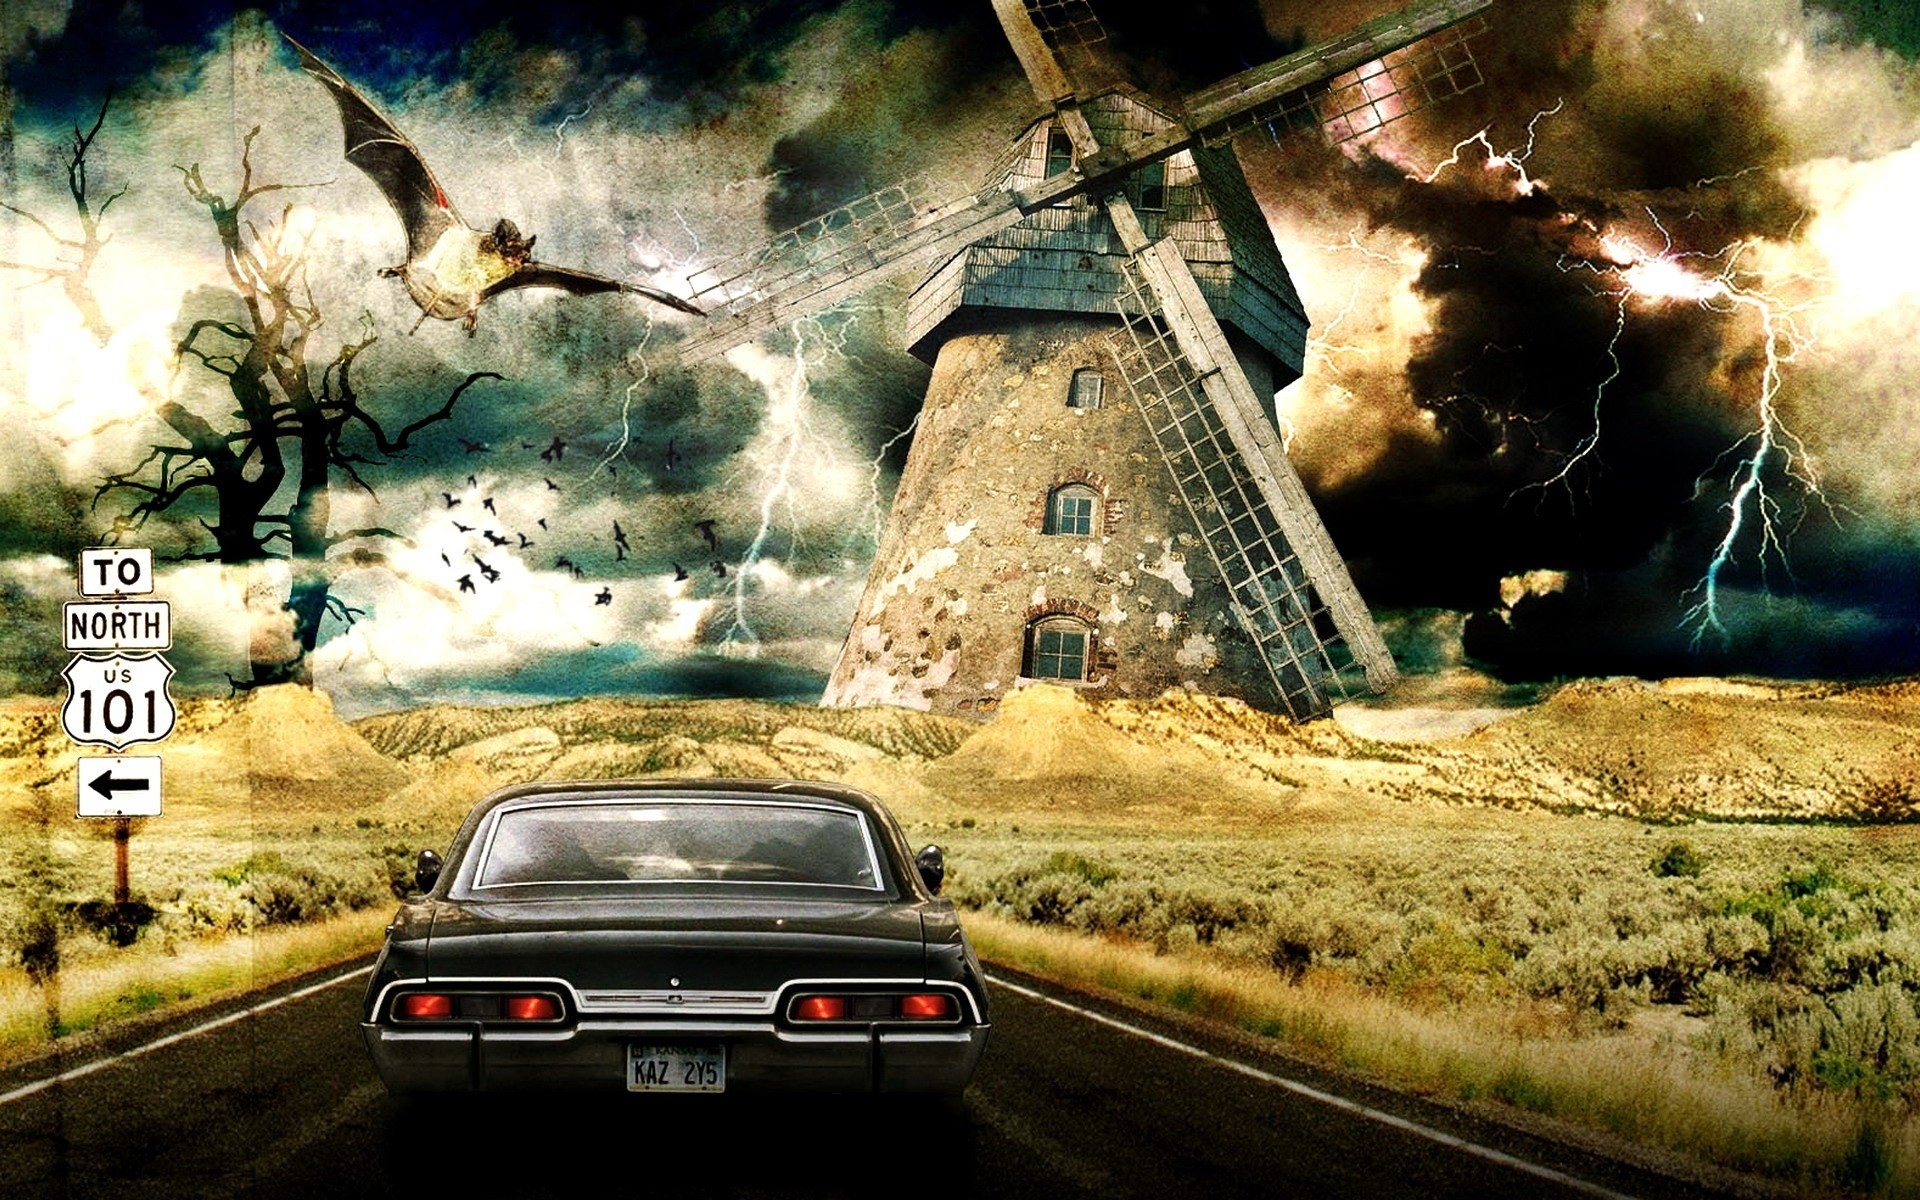 1920x1200 HD Wallpaper and background photos of the road so far for fans of  Supernatural images.